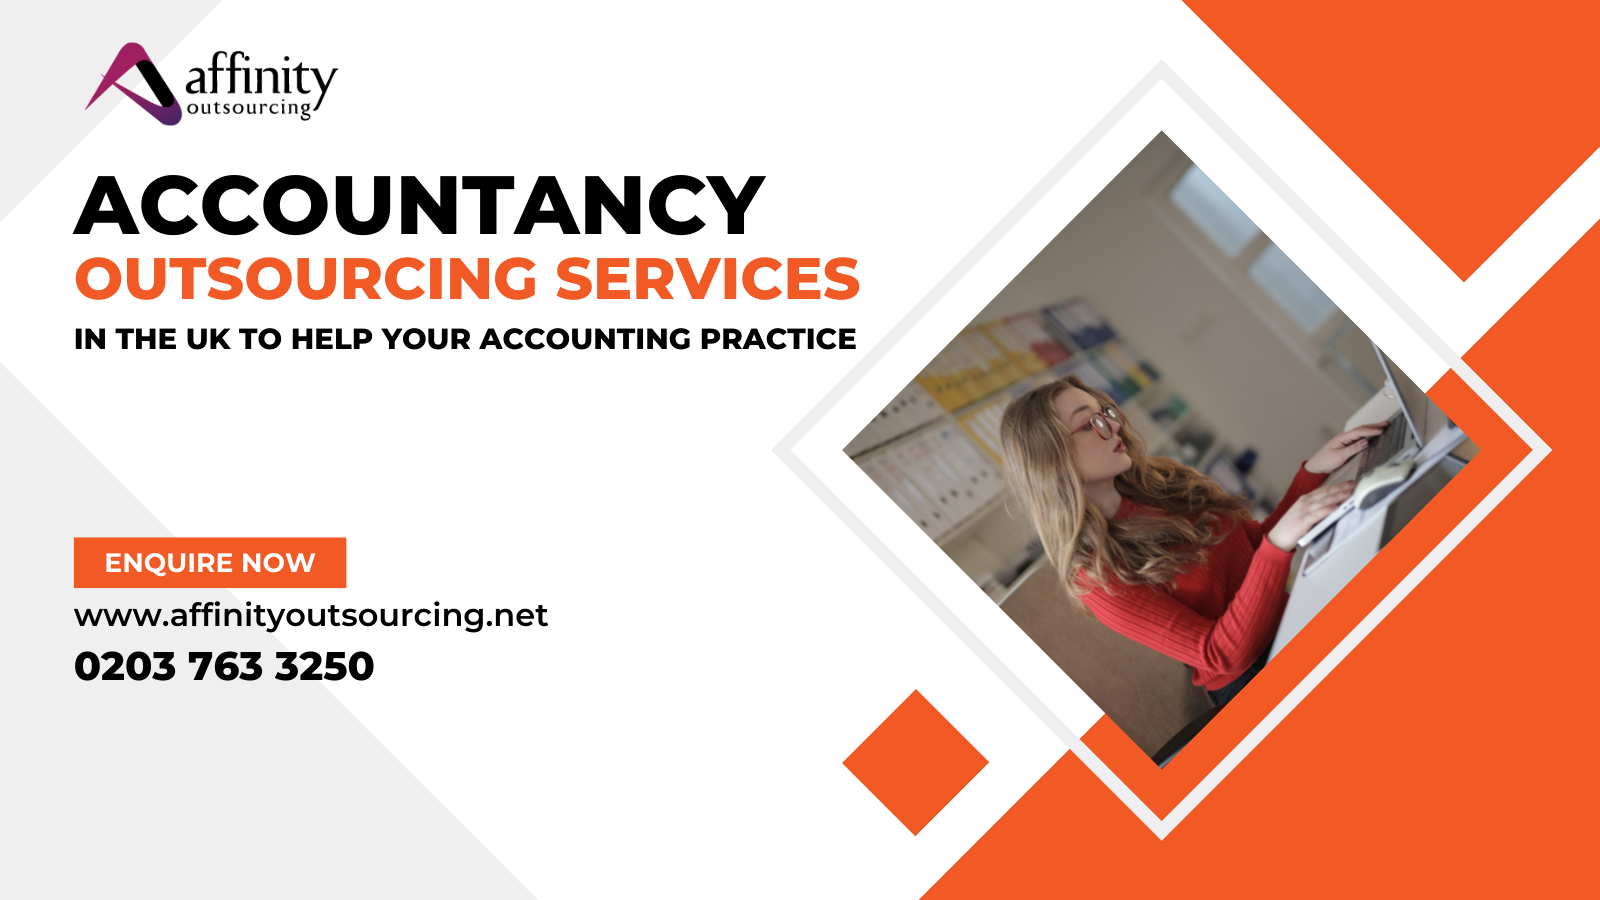 Accountancy Outsourcing Services in the UK to Help Your Accounting Practice